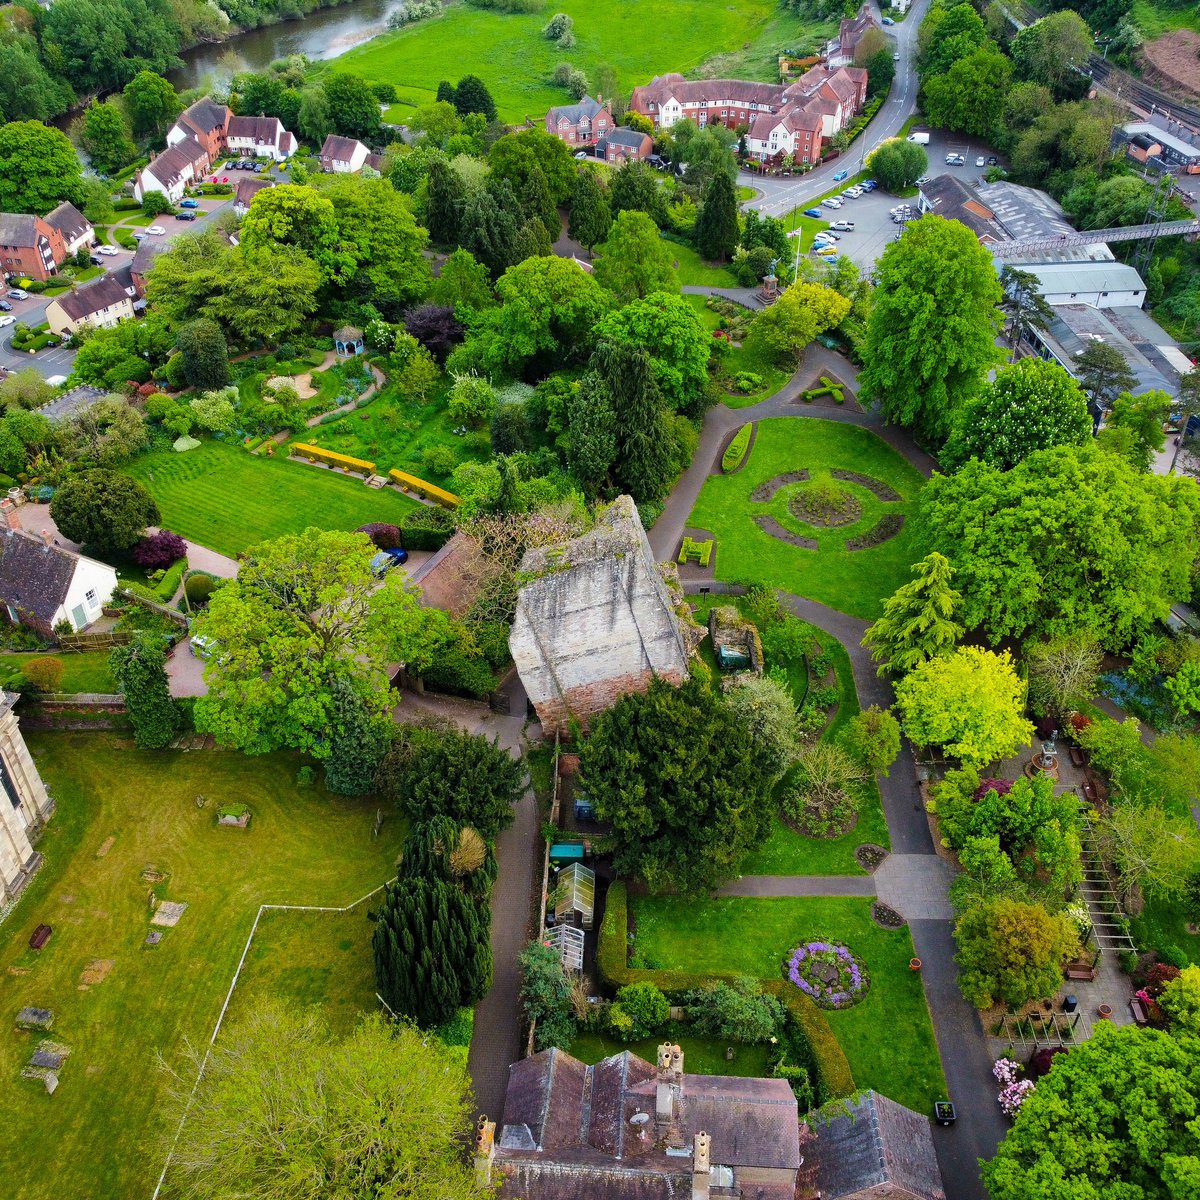 Tilted towers and tilted tales, Bridgnorth’s leaning castle ruins.. #drones #drone #dji #bridgnorth #Shropshire #photographylovers #photooftheday #castle #castleruins #historical